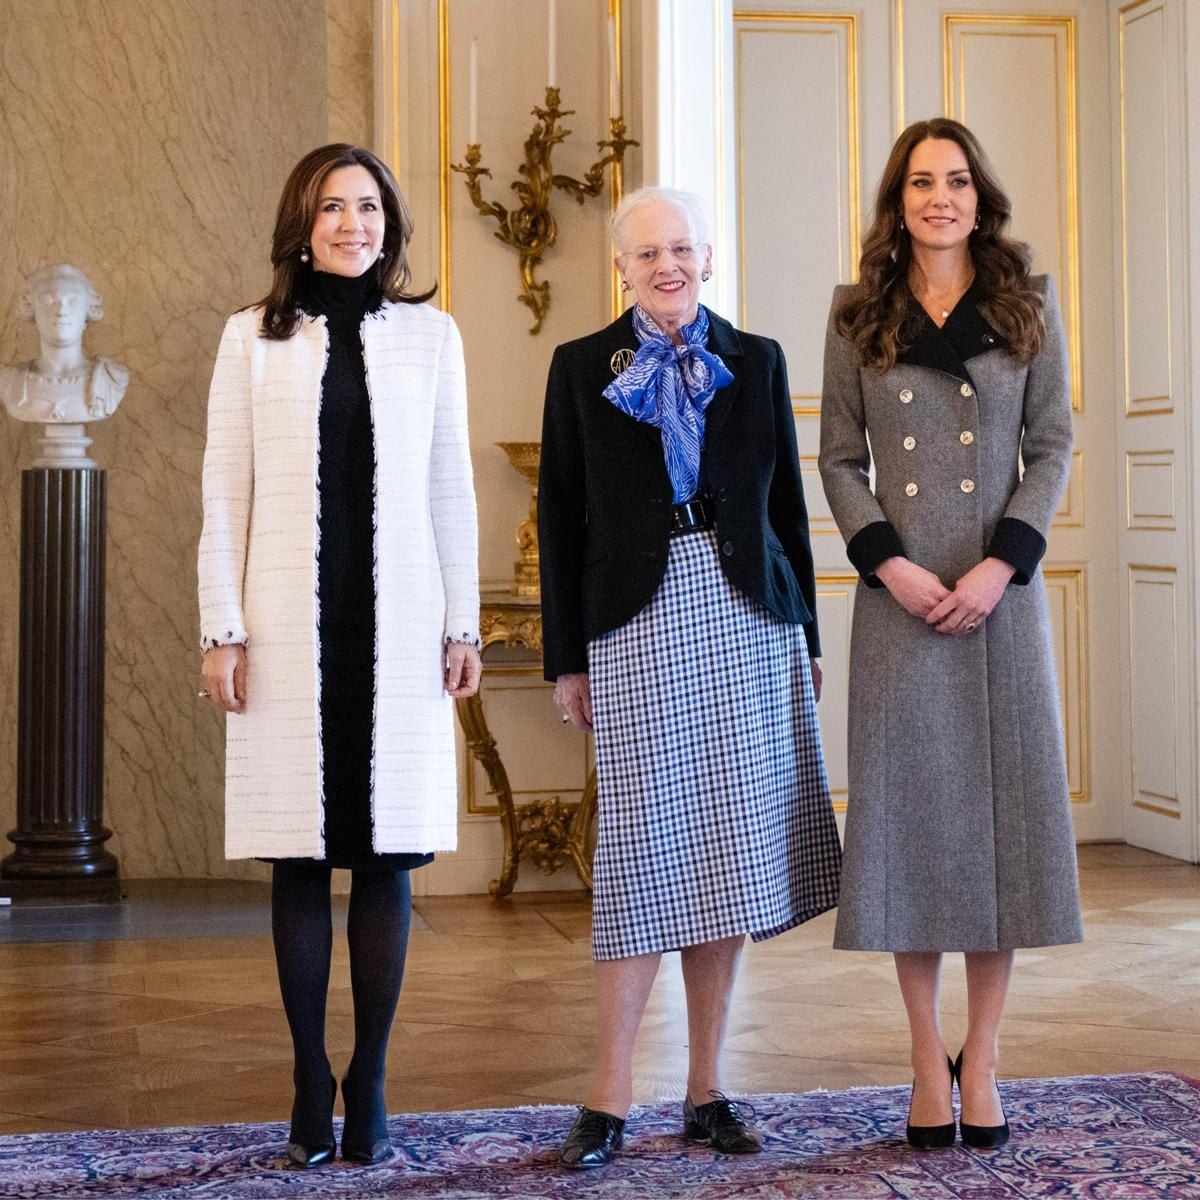 The Danish Queen and Crown Princess welcomed Kate to Denmark with a reception at Amalienborg